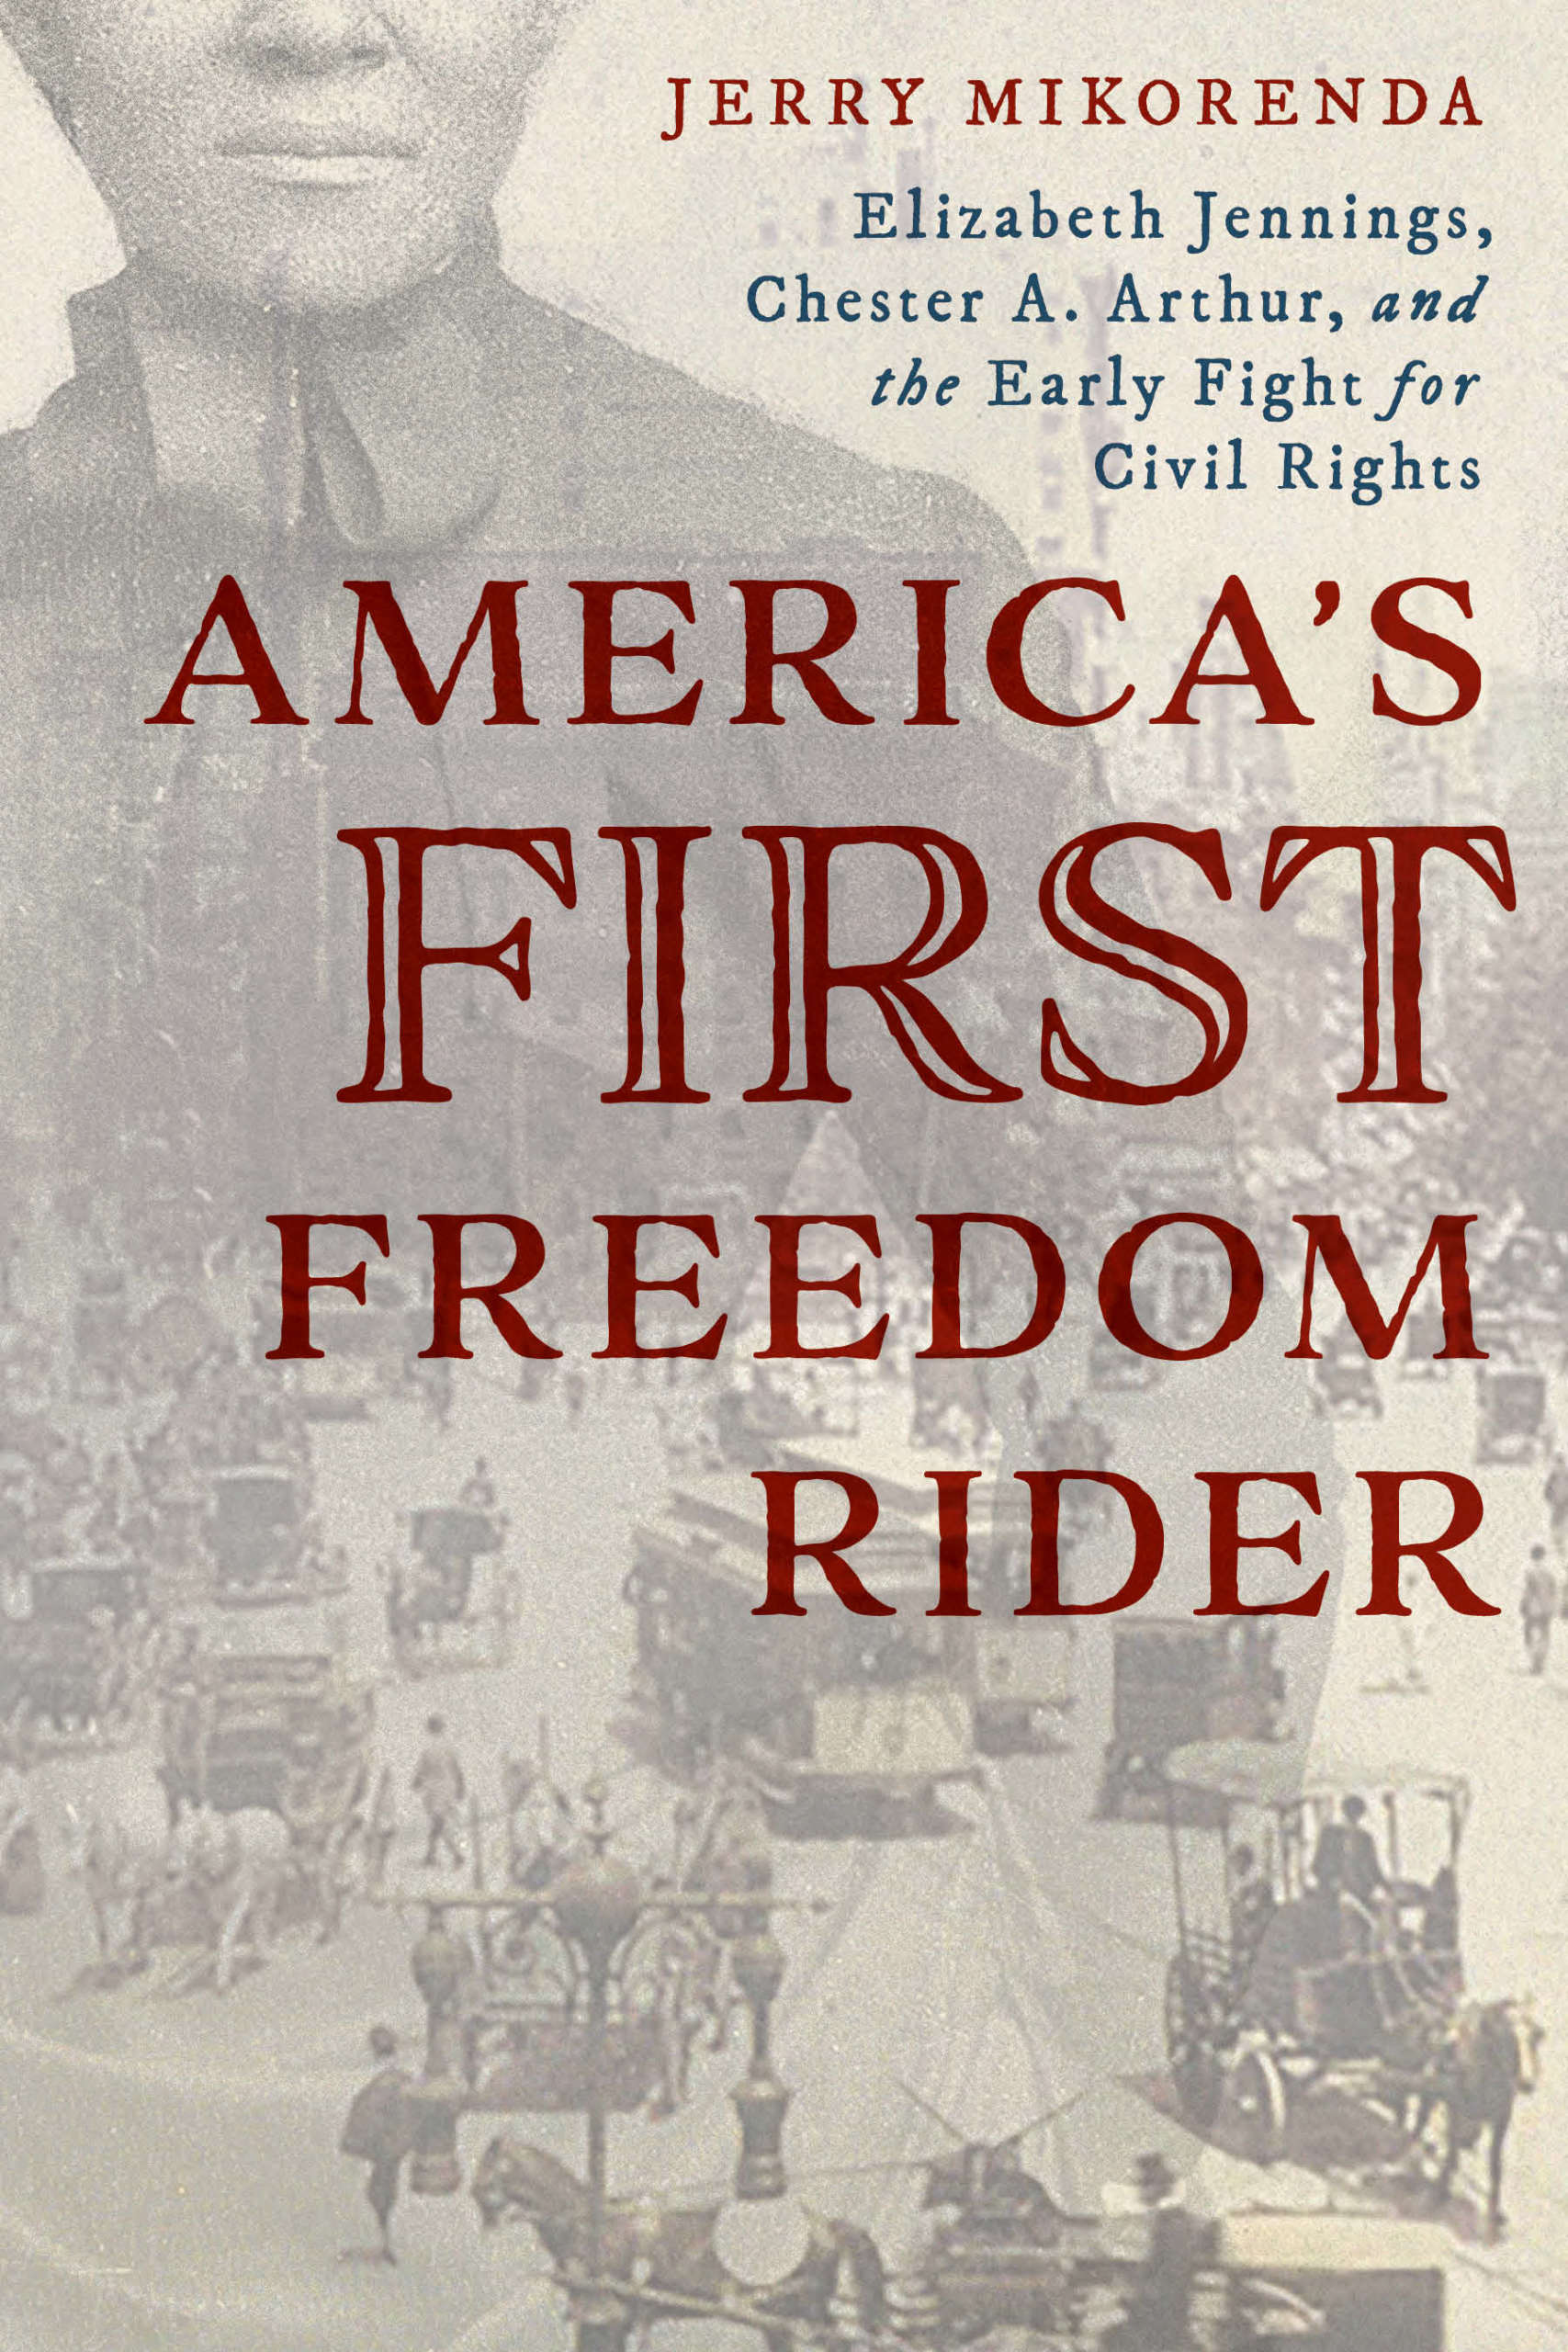 America's First Freedom Rider book jacket cover